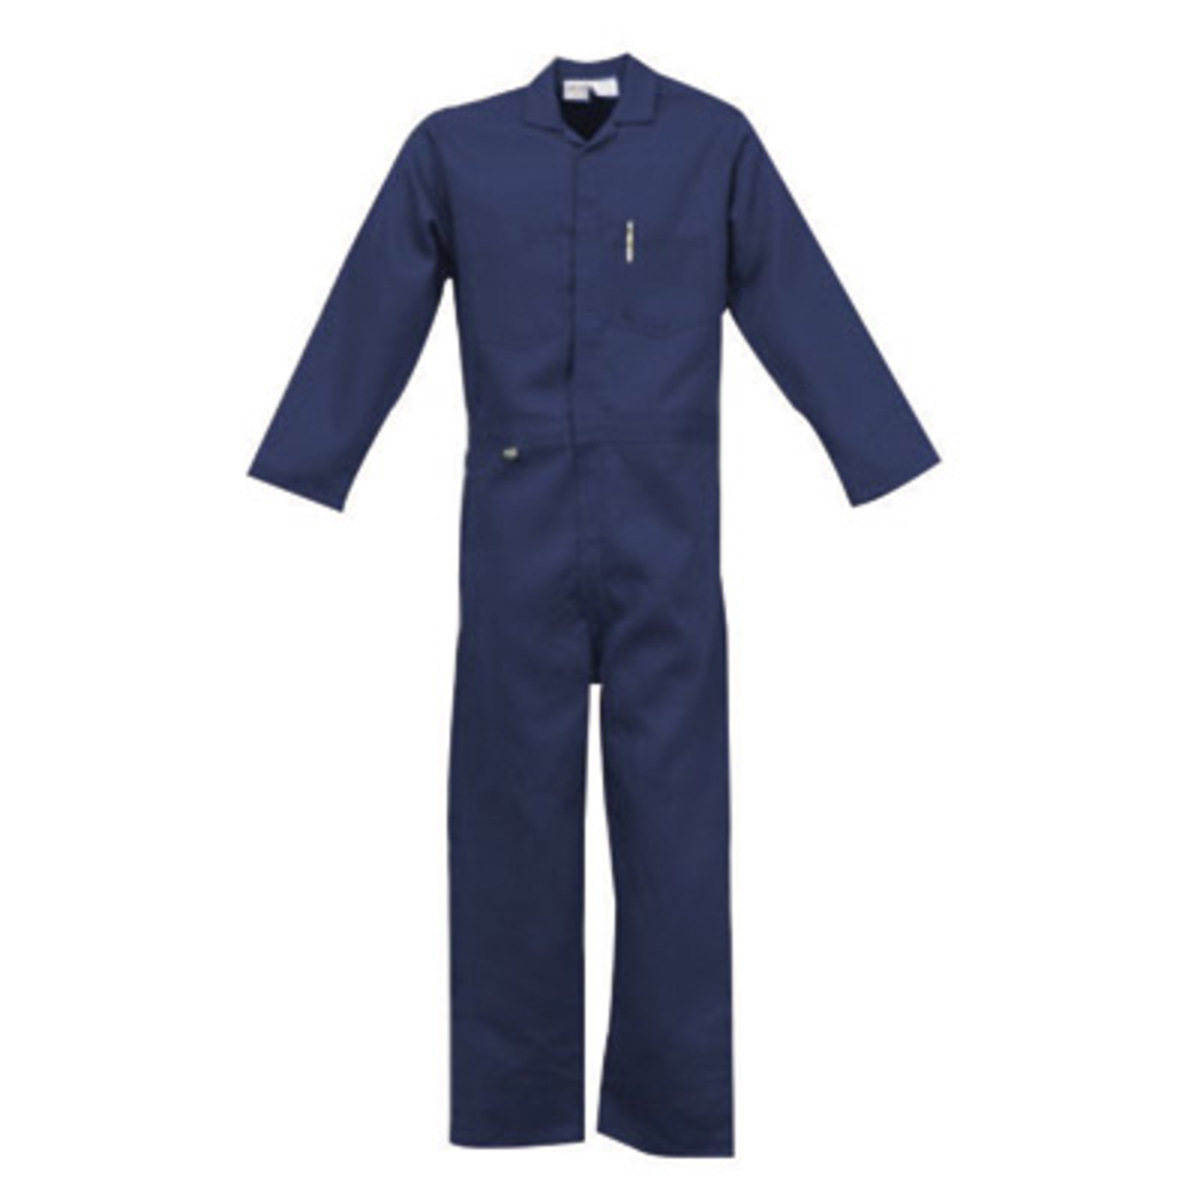 Stanco Safety Products™ Medium Navy Blue Indura® UltraSoft® Arc Rated Flame Resistant Coveralls With Front Zipper Closure